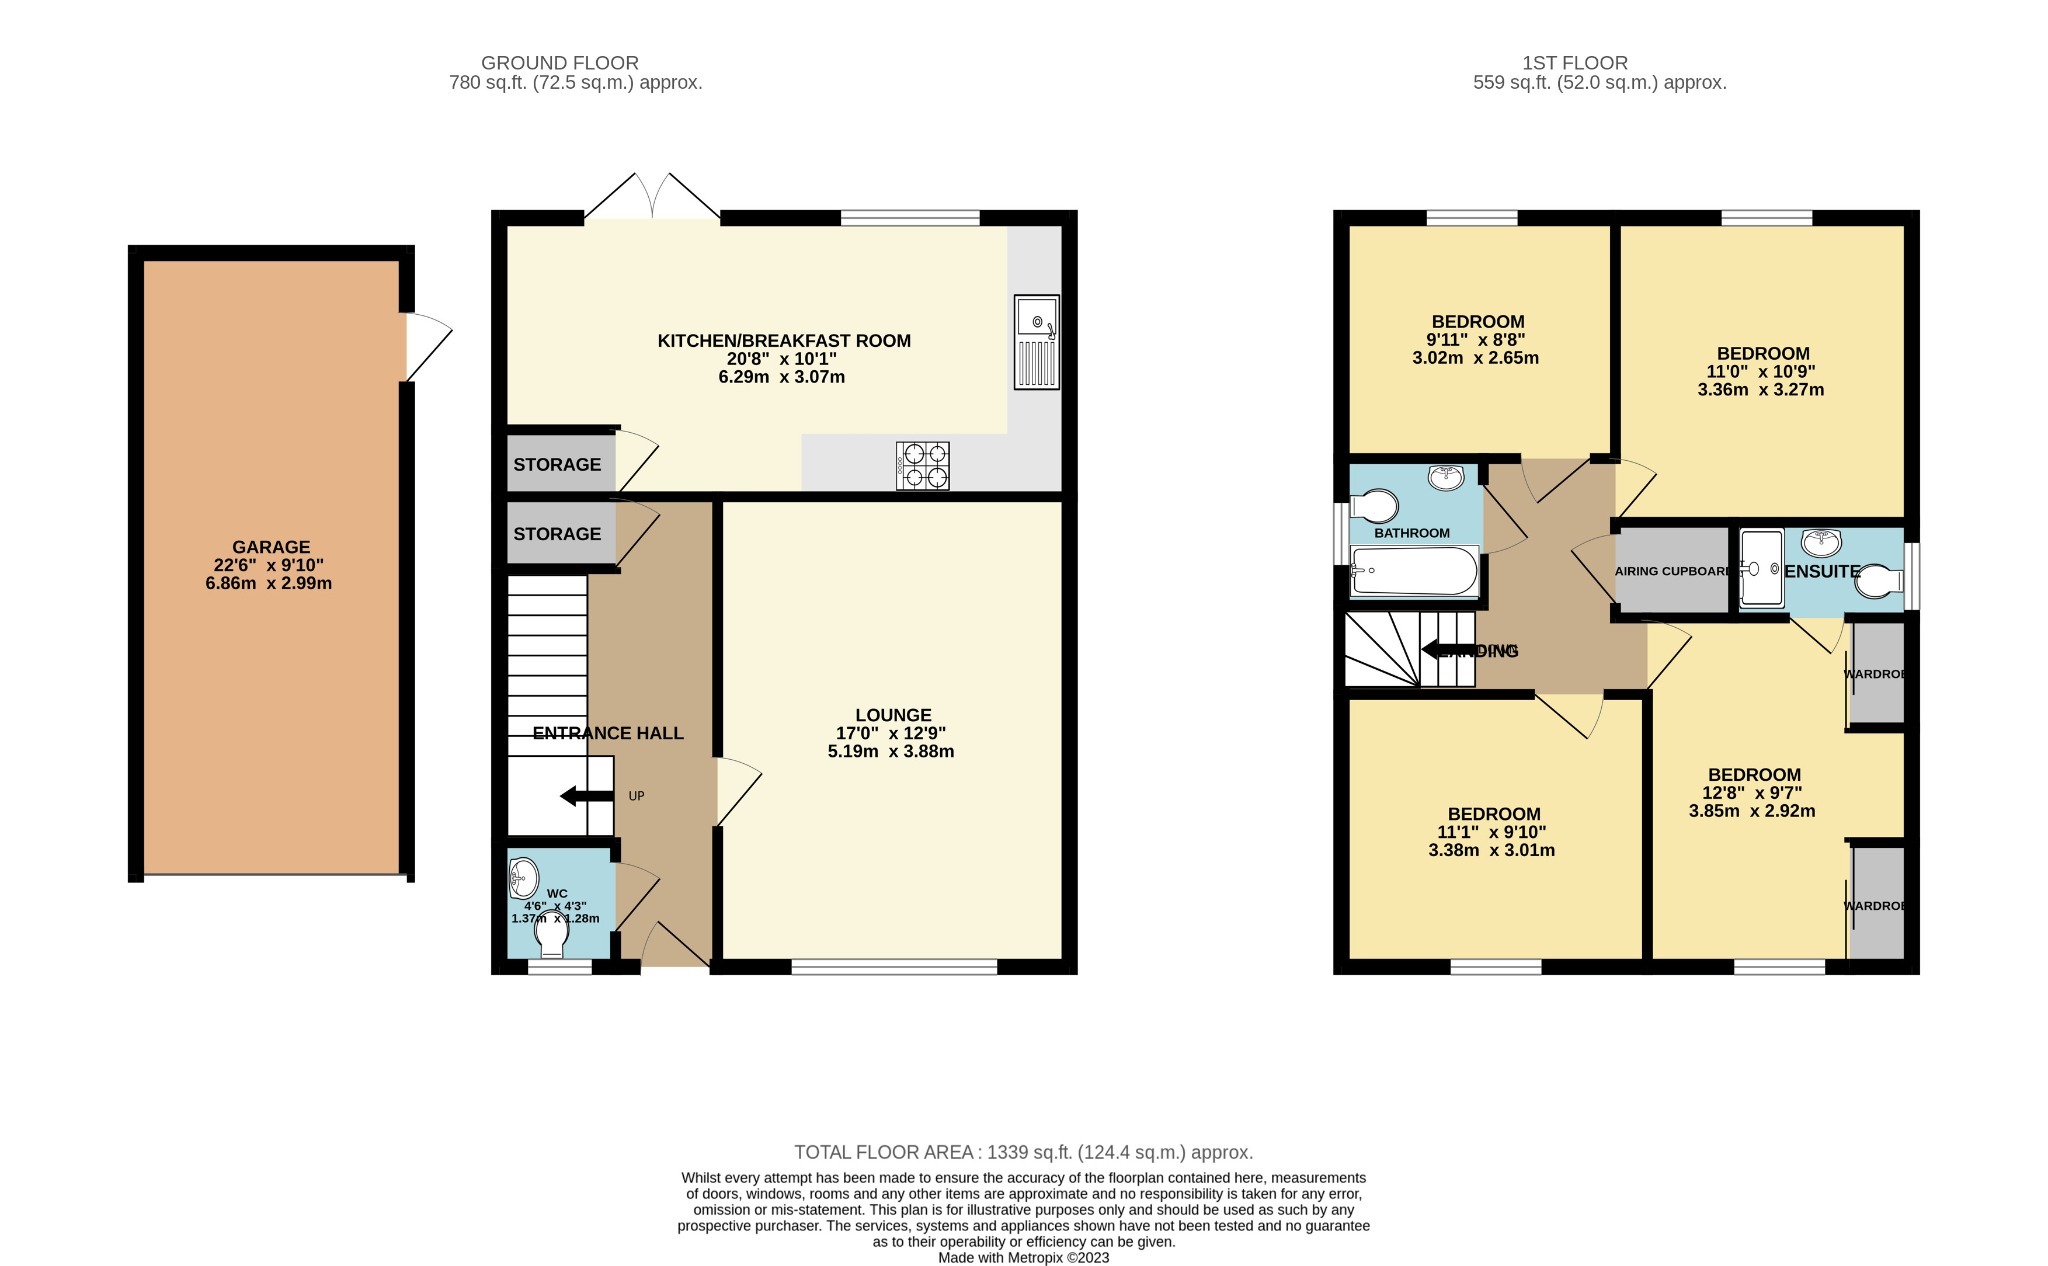 4 bed semi-detached house to rent in Gemini Road, Reading - Property floorplan